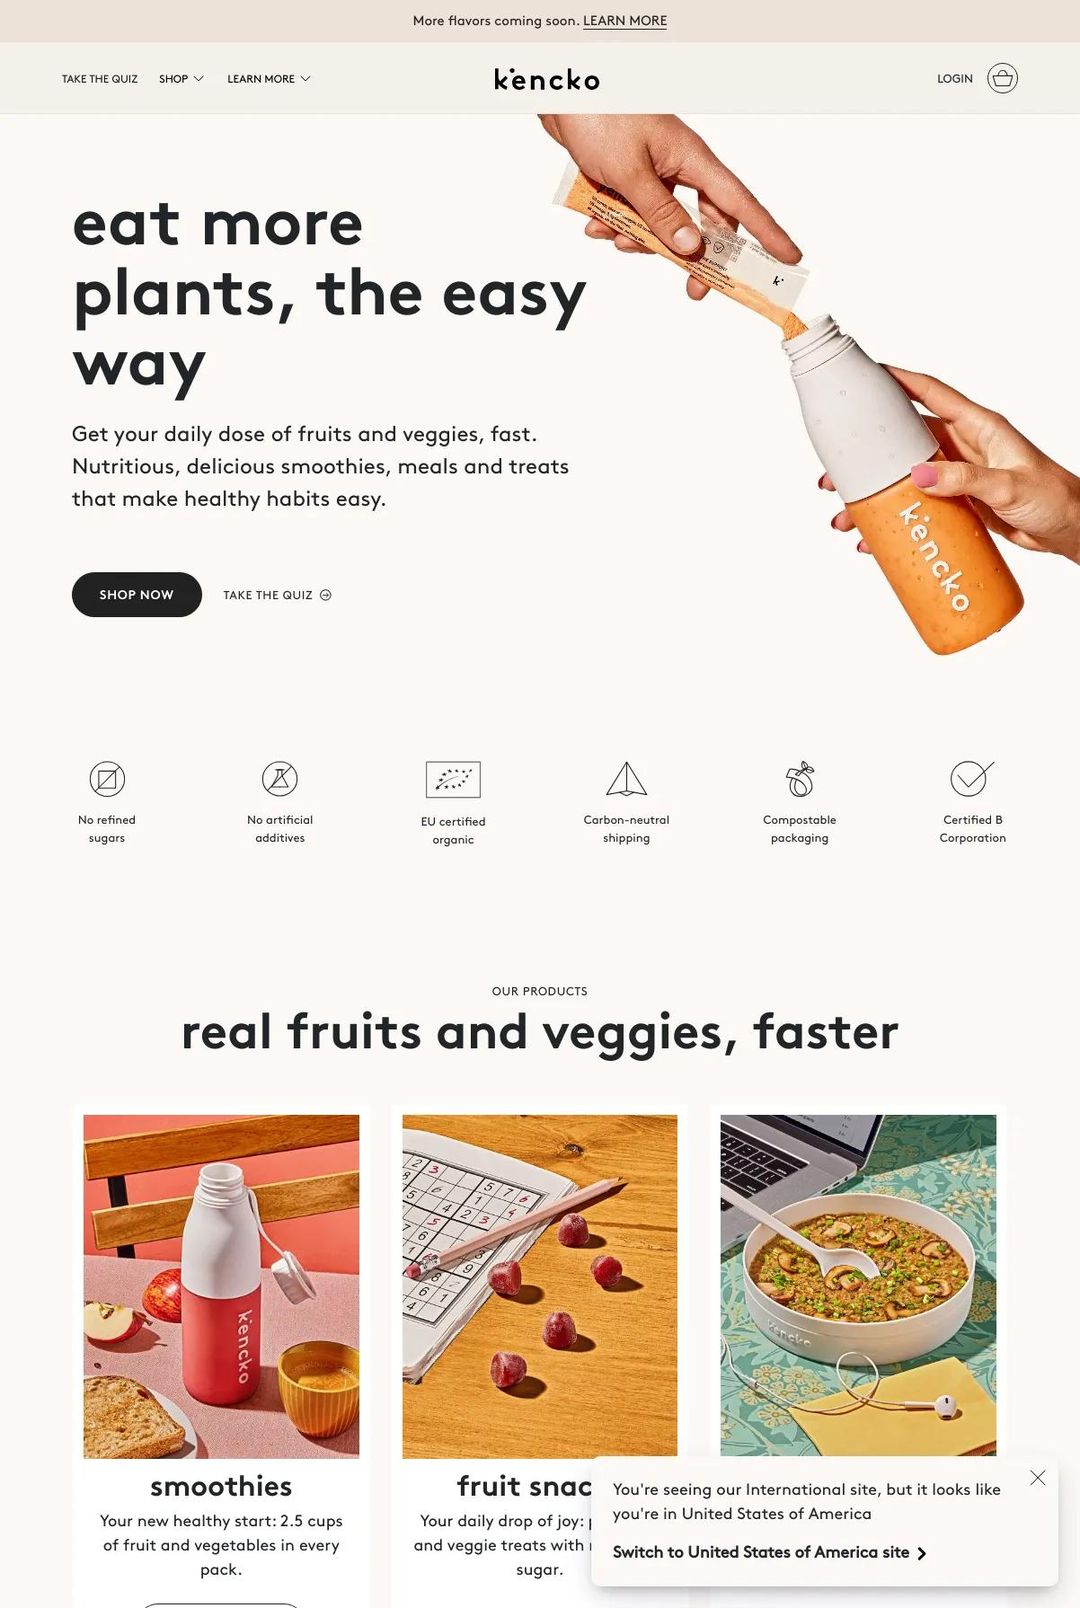 Screenshot 1 of Kencko (Example Shopify Food and Beverage Website)